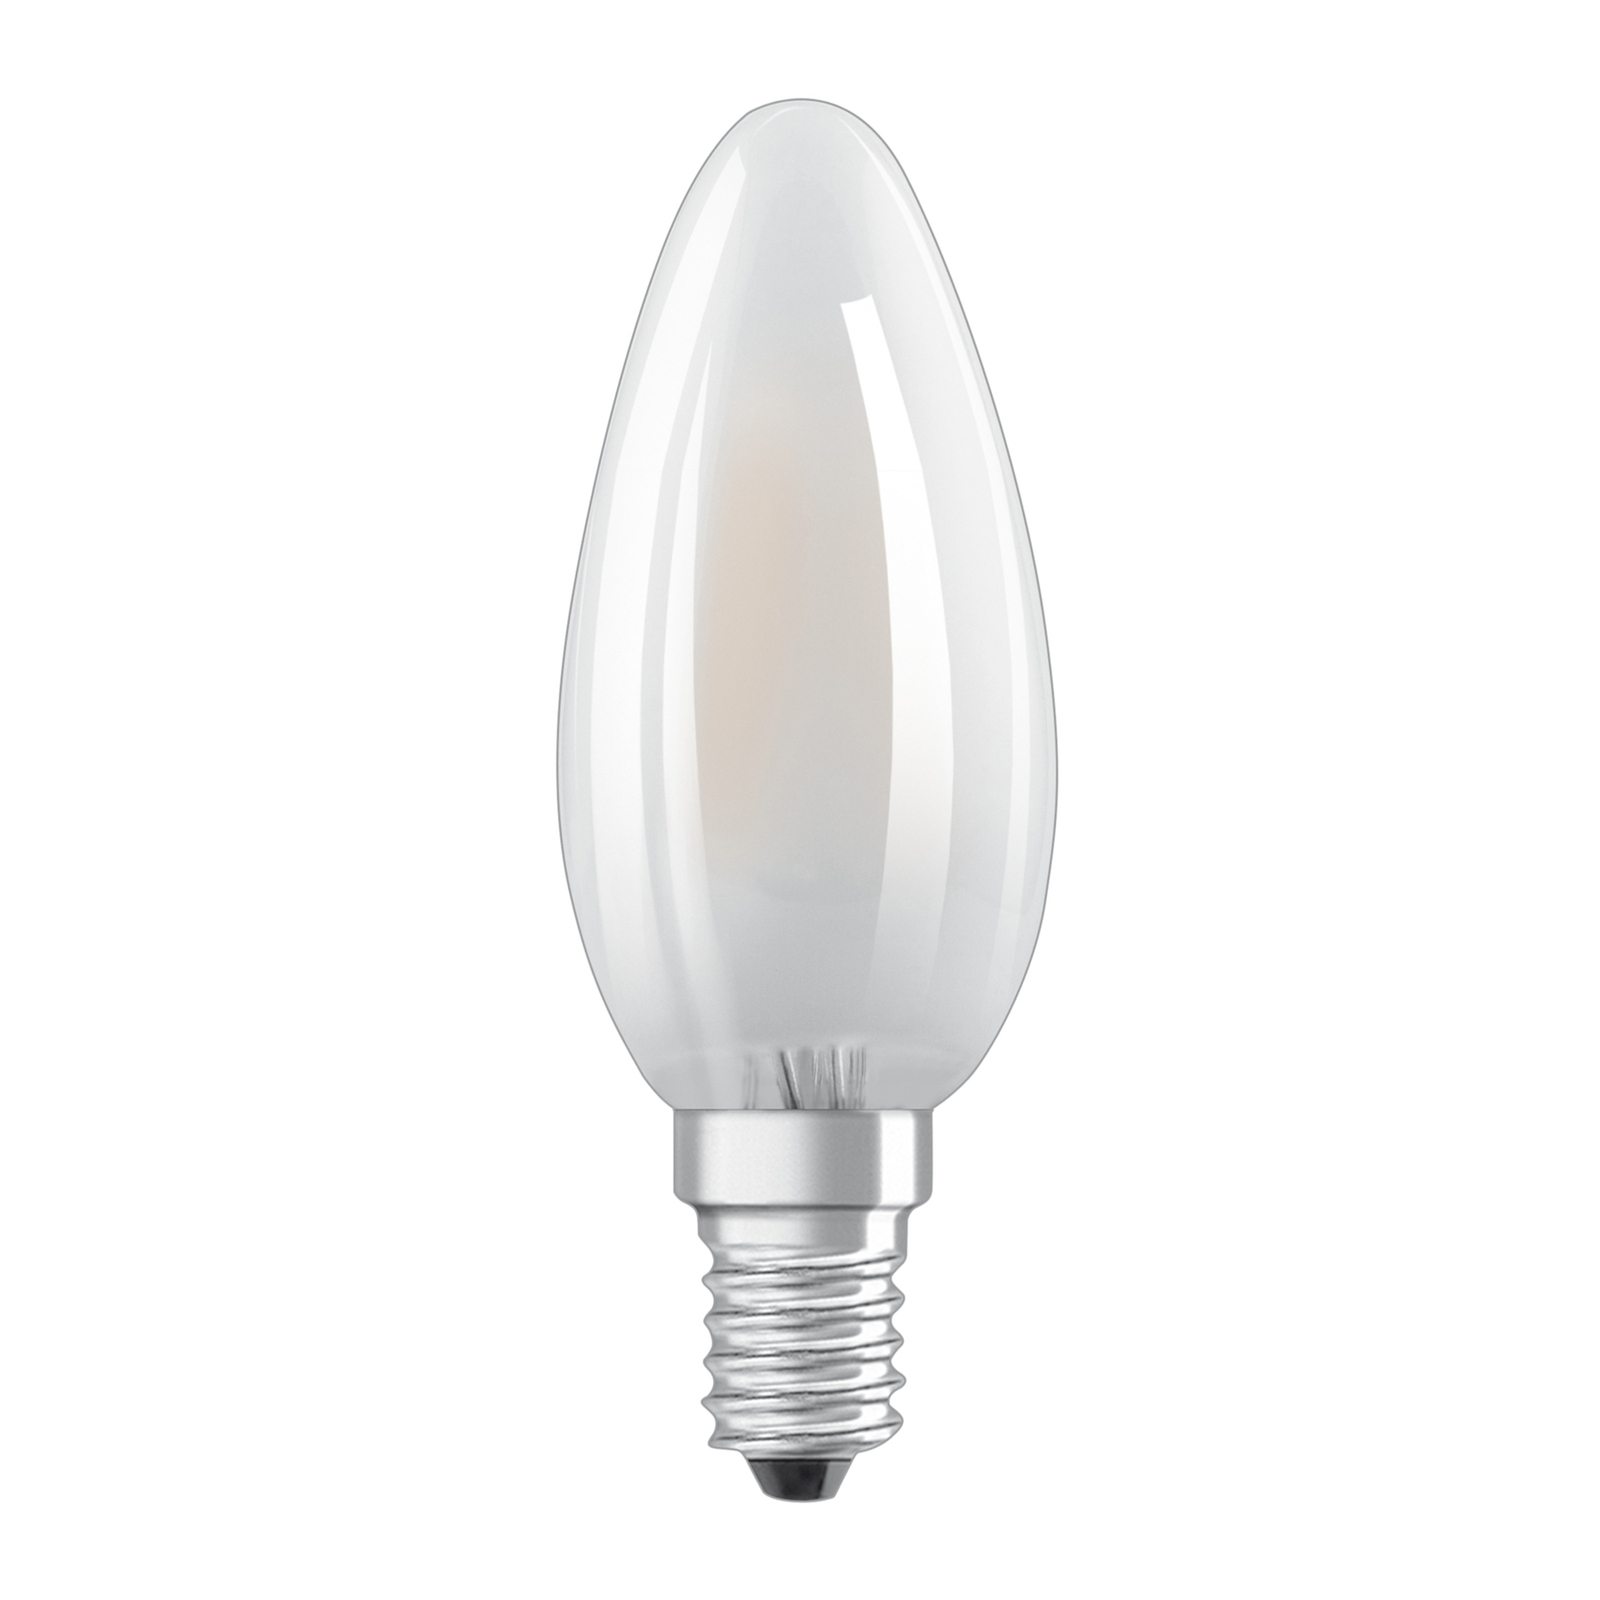 OSRAM ampoule flamme LED E14 5,5W 2 700 K dimmable